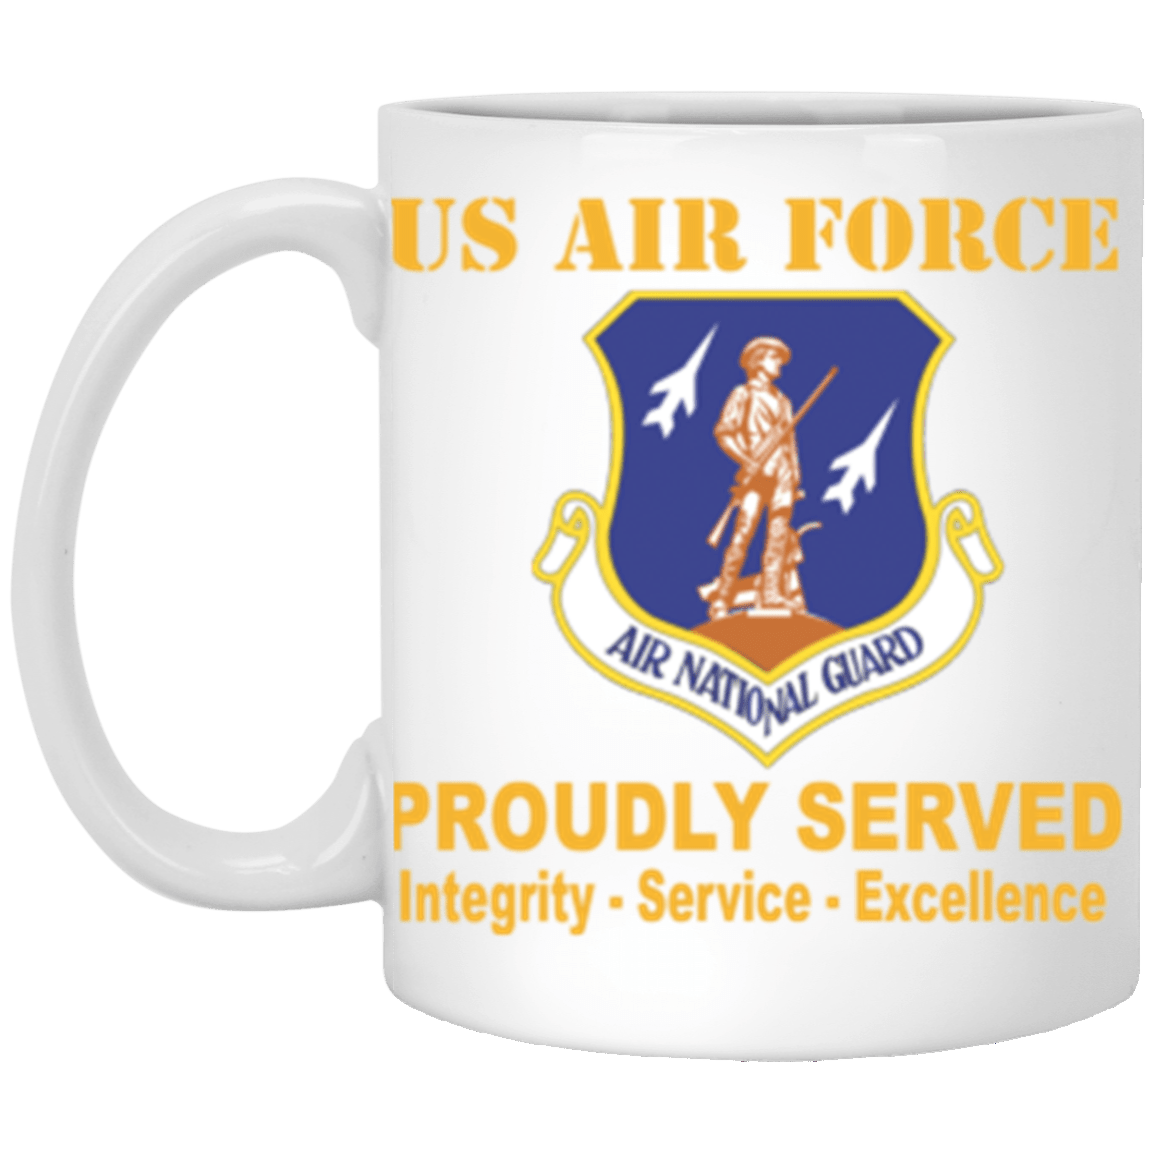 US Air Force Air National Guard Proudly Served Core Values 11 oz. White Mug-Drinkware-Veterans Nation